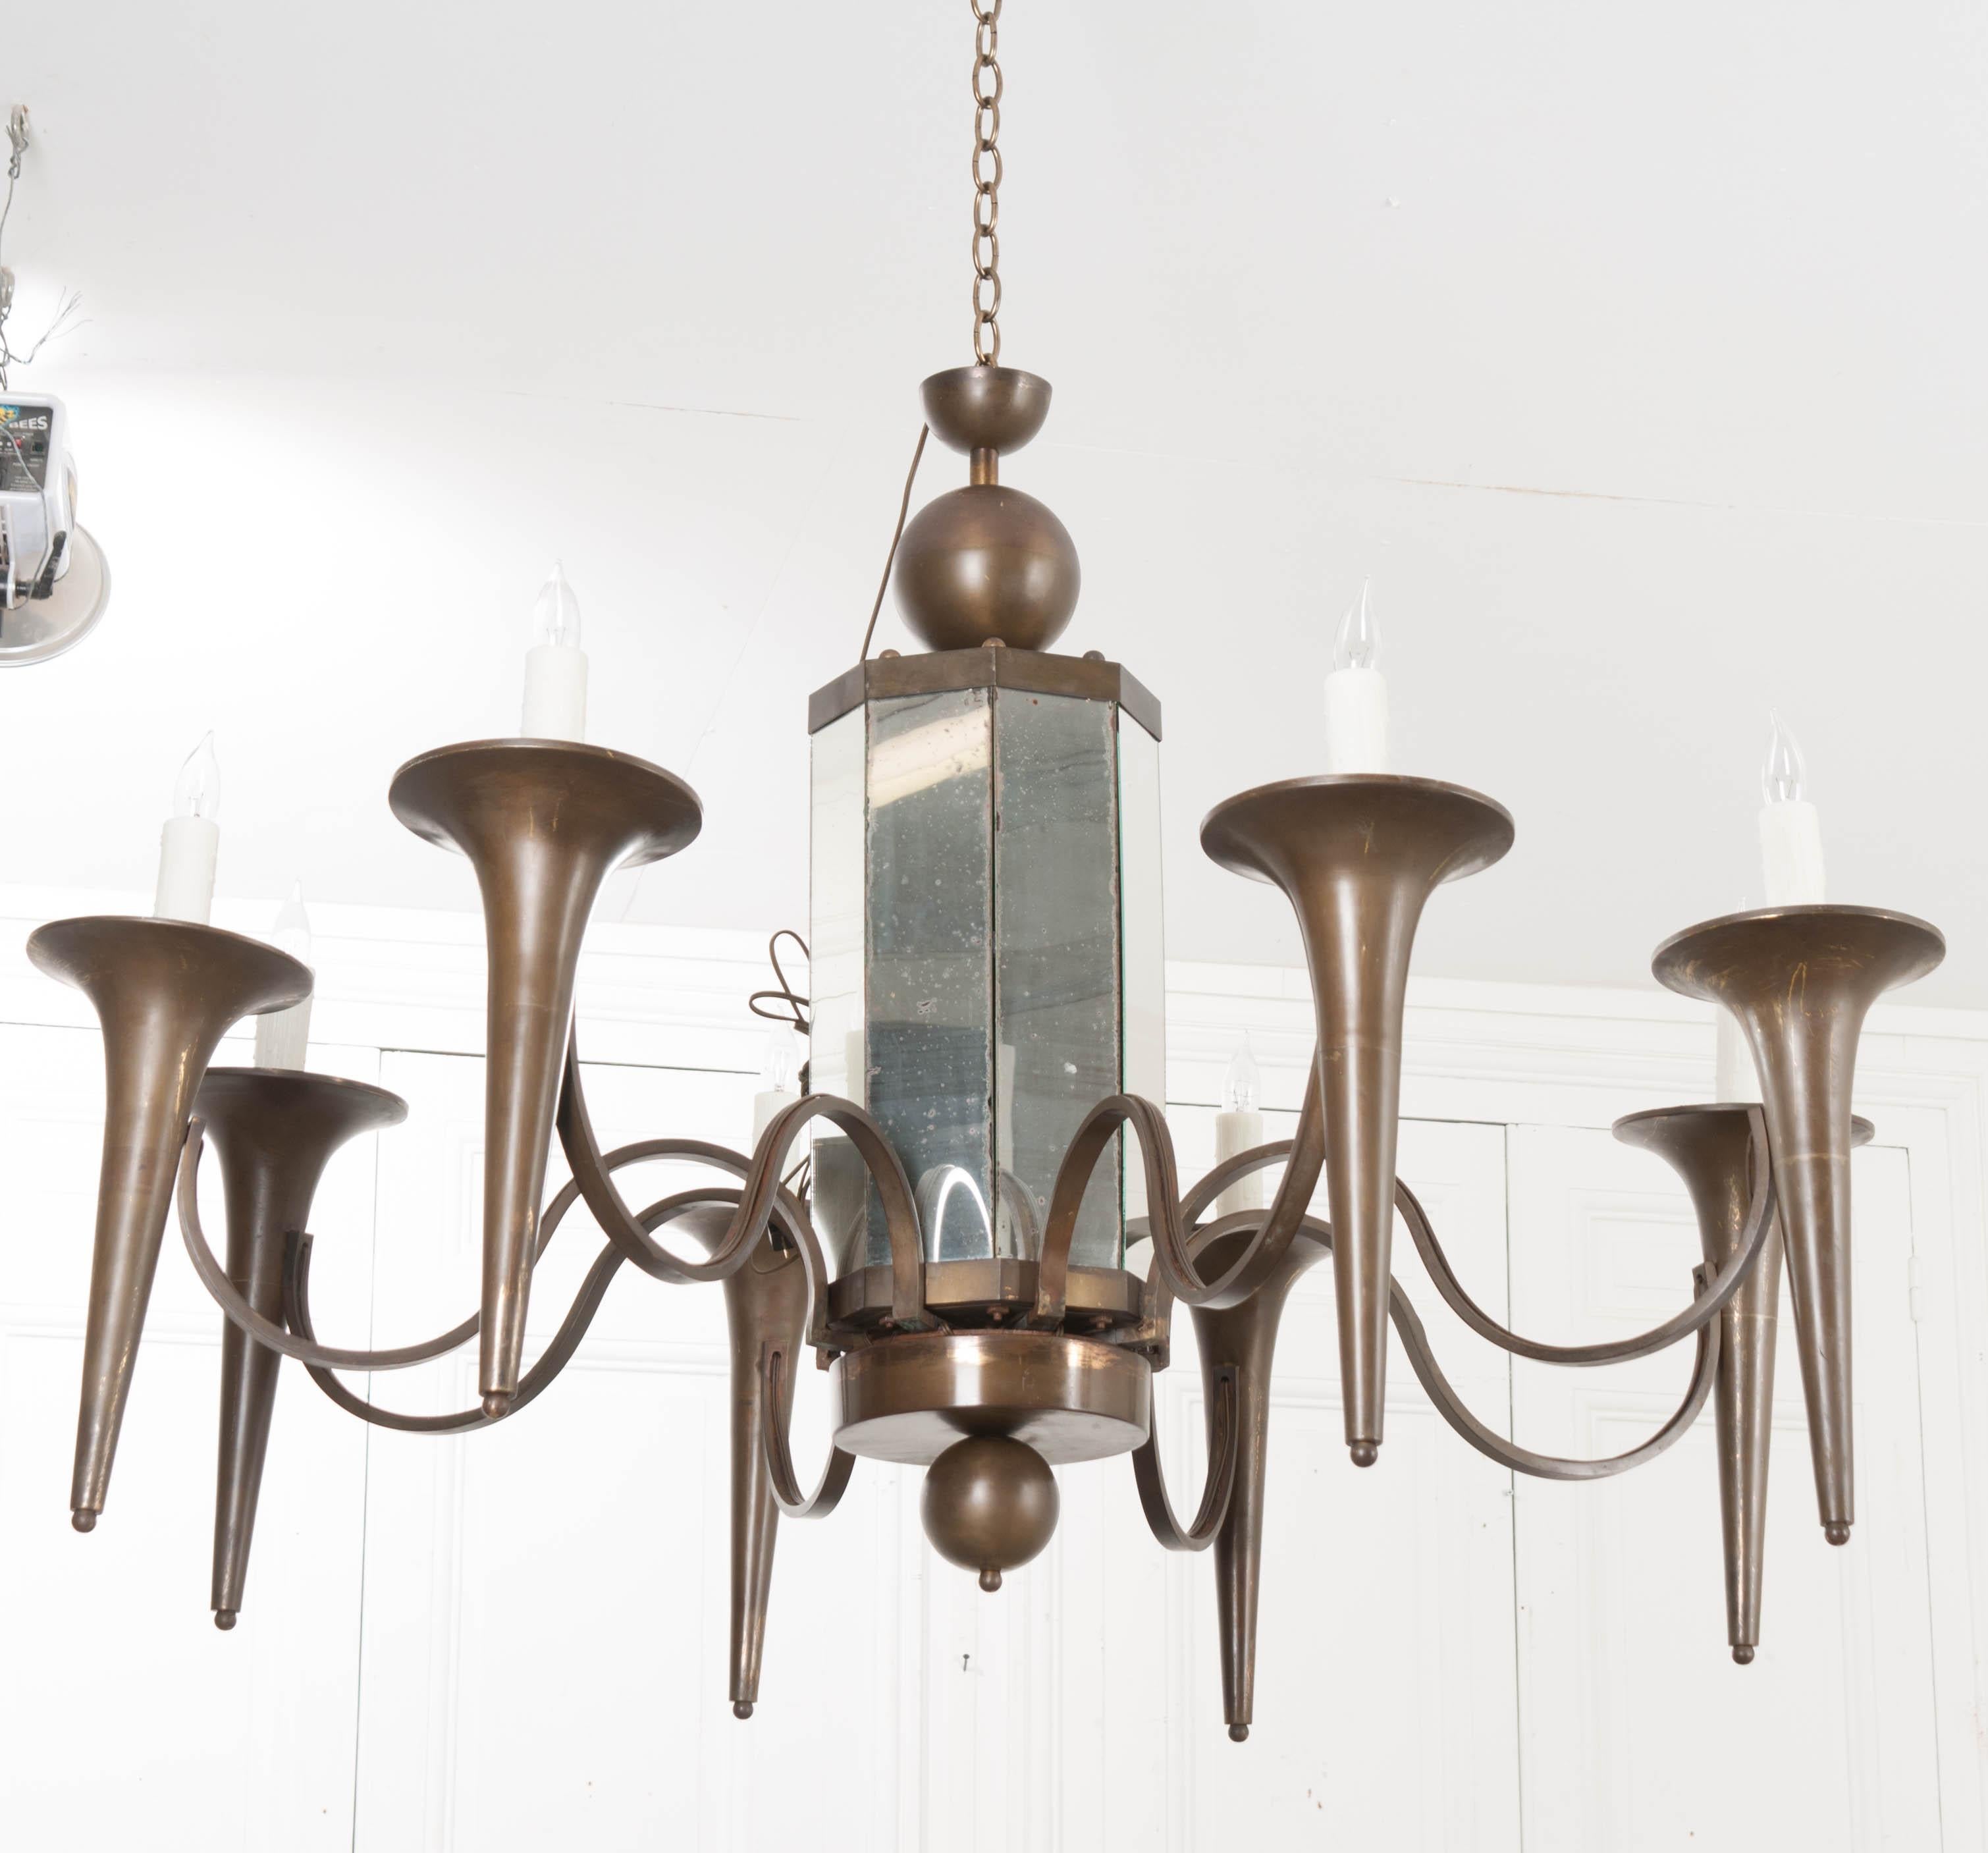 This fabulous, large Art Moderne bronze finished eight-light chandelier, c. 1930s, is from France and features a paneled and mirrored standard, composed of old and new mirror plates, suspending eight scroll-arms terminating with trumpet-form